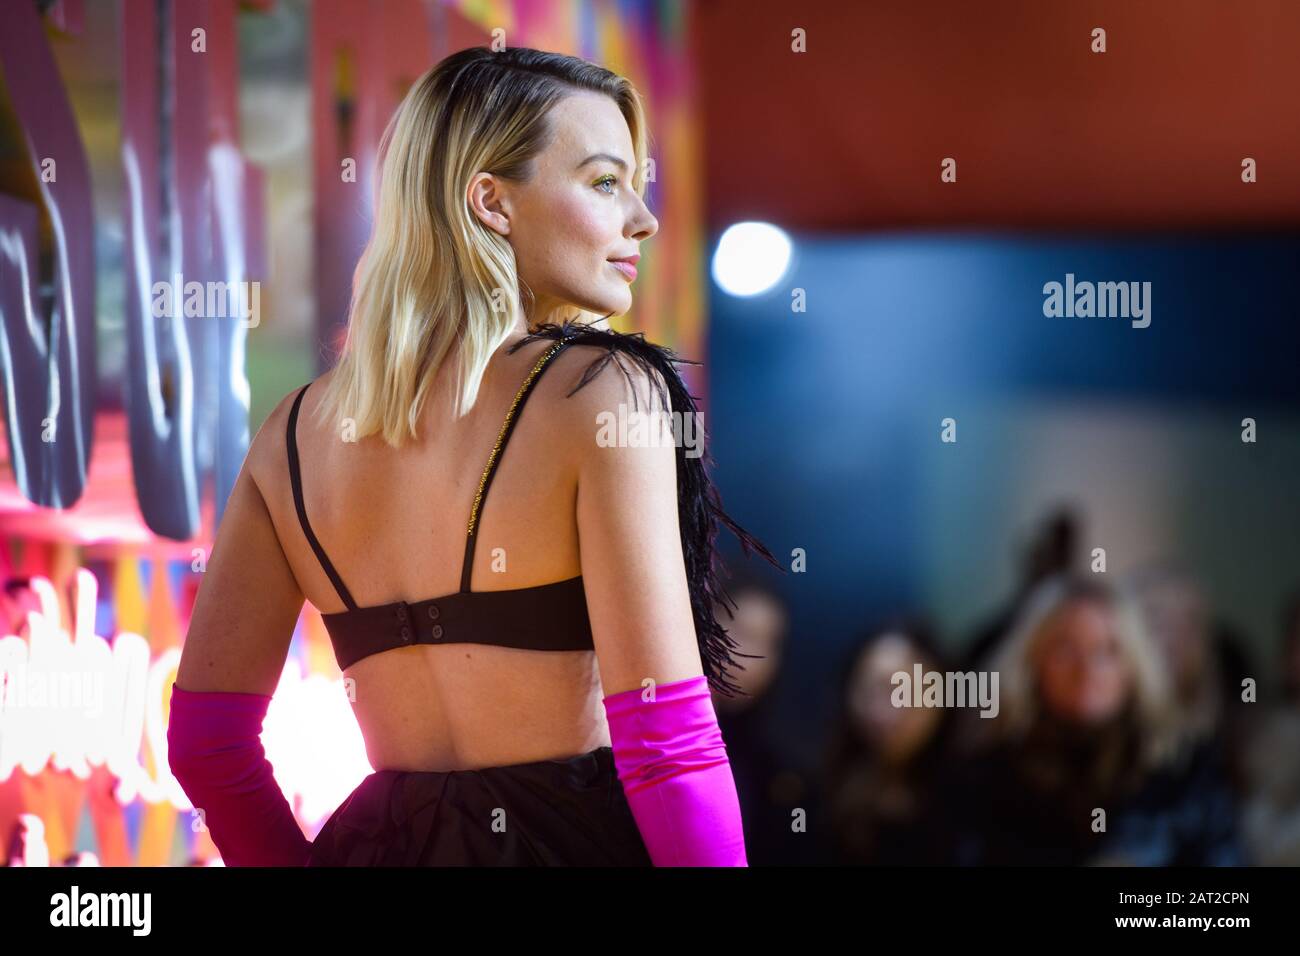 Margot Robbie attending the world premiere of Birds of Prey and the Fantabulous Emancipation of One Harley Quinn, held at the BFI IMAX, London. Stock Photo